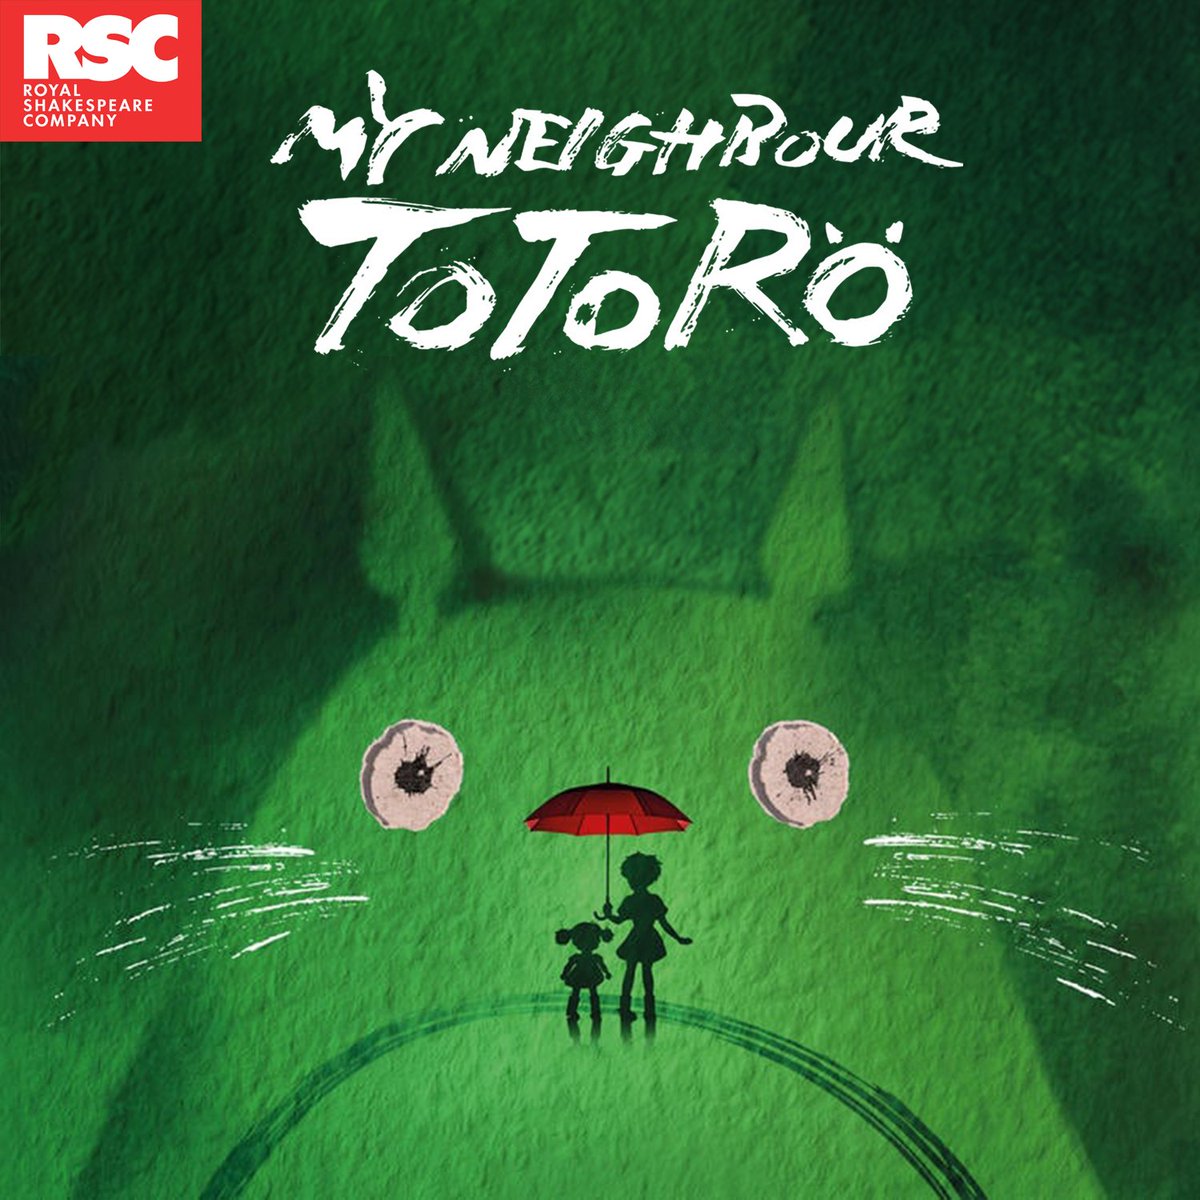 It's said the greatest art is created with love. In a lifetime of theatregoing, the hours spent with @totoro_show are perhaps the most joyous I've ever had. It was transcendent. To the whole cast, crew, and creatives, thank you from the bottom of my heart. #FindYourSpirit